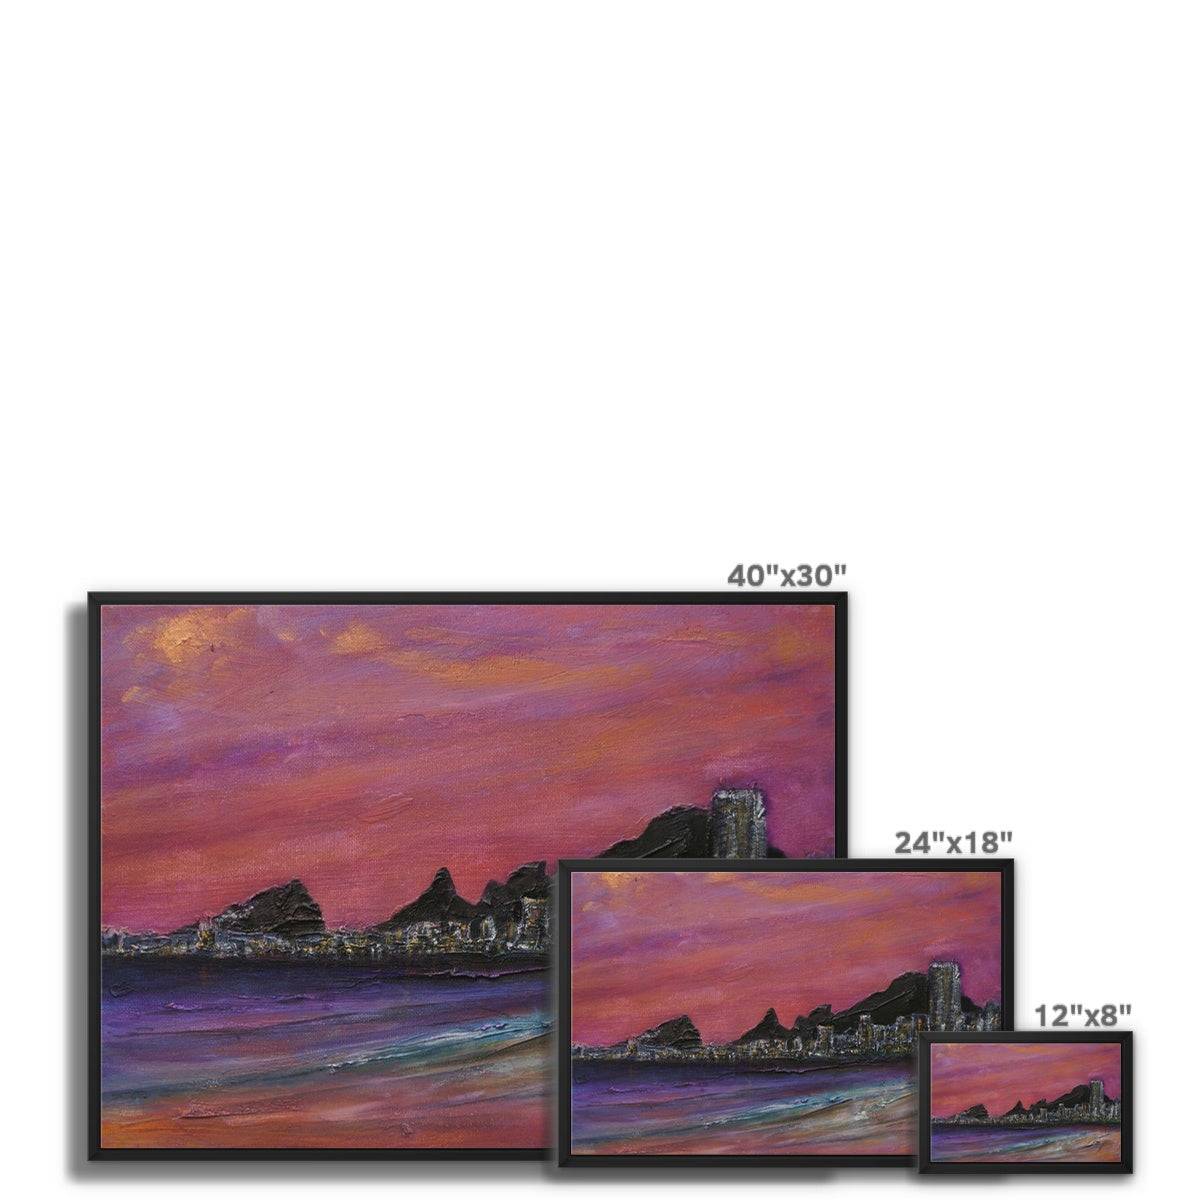 Copacabana Beach Dusk Painting | Framed Canvas From Scotland-Floating Framed Canvas Prints-World Art Gallery-Paintings, Prints, Homeware, Art Gifts From Scotland By Scottish Artist Kevin Hunter